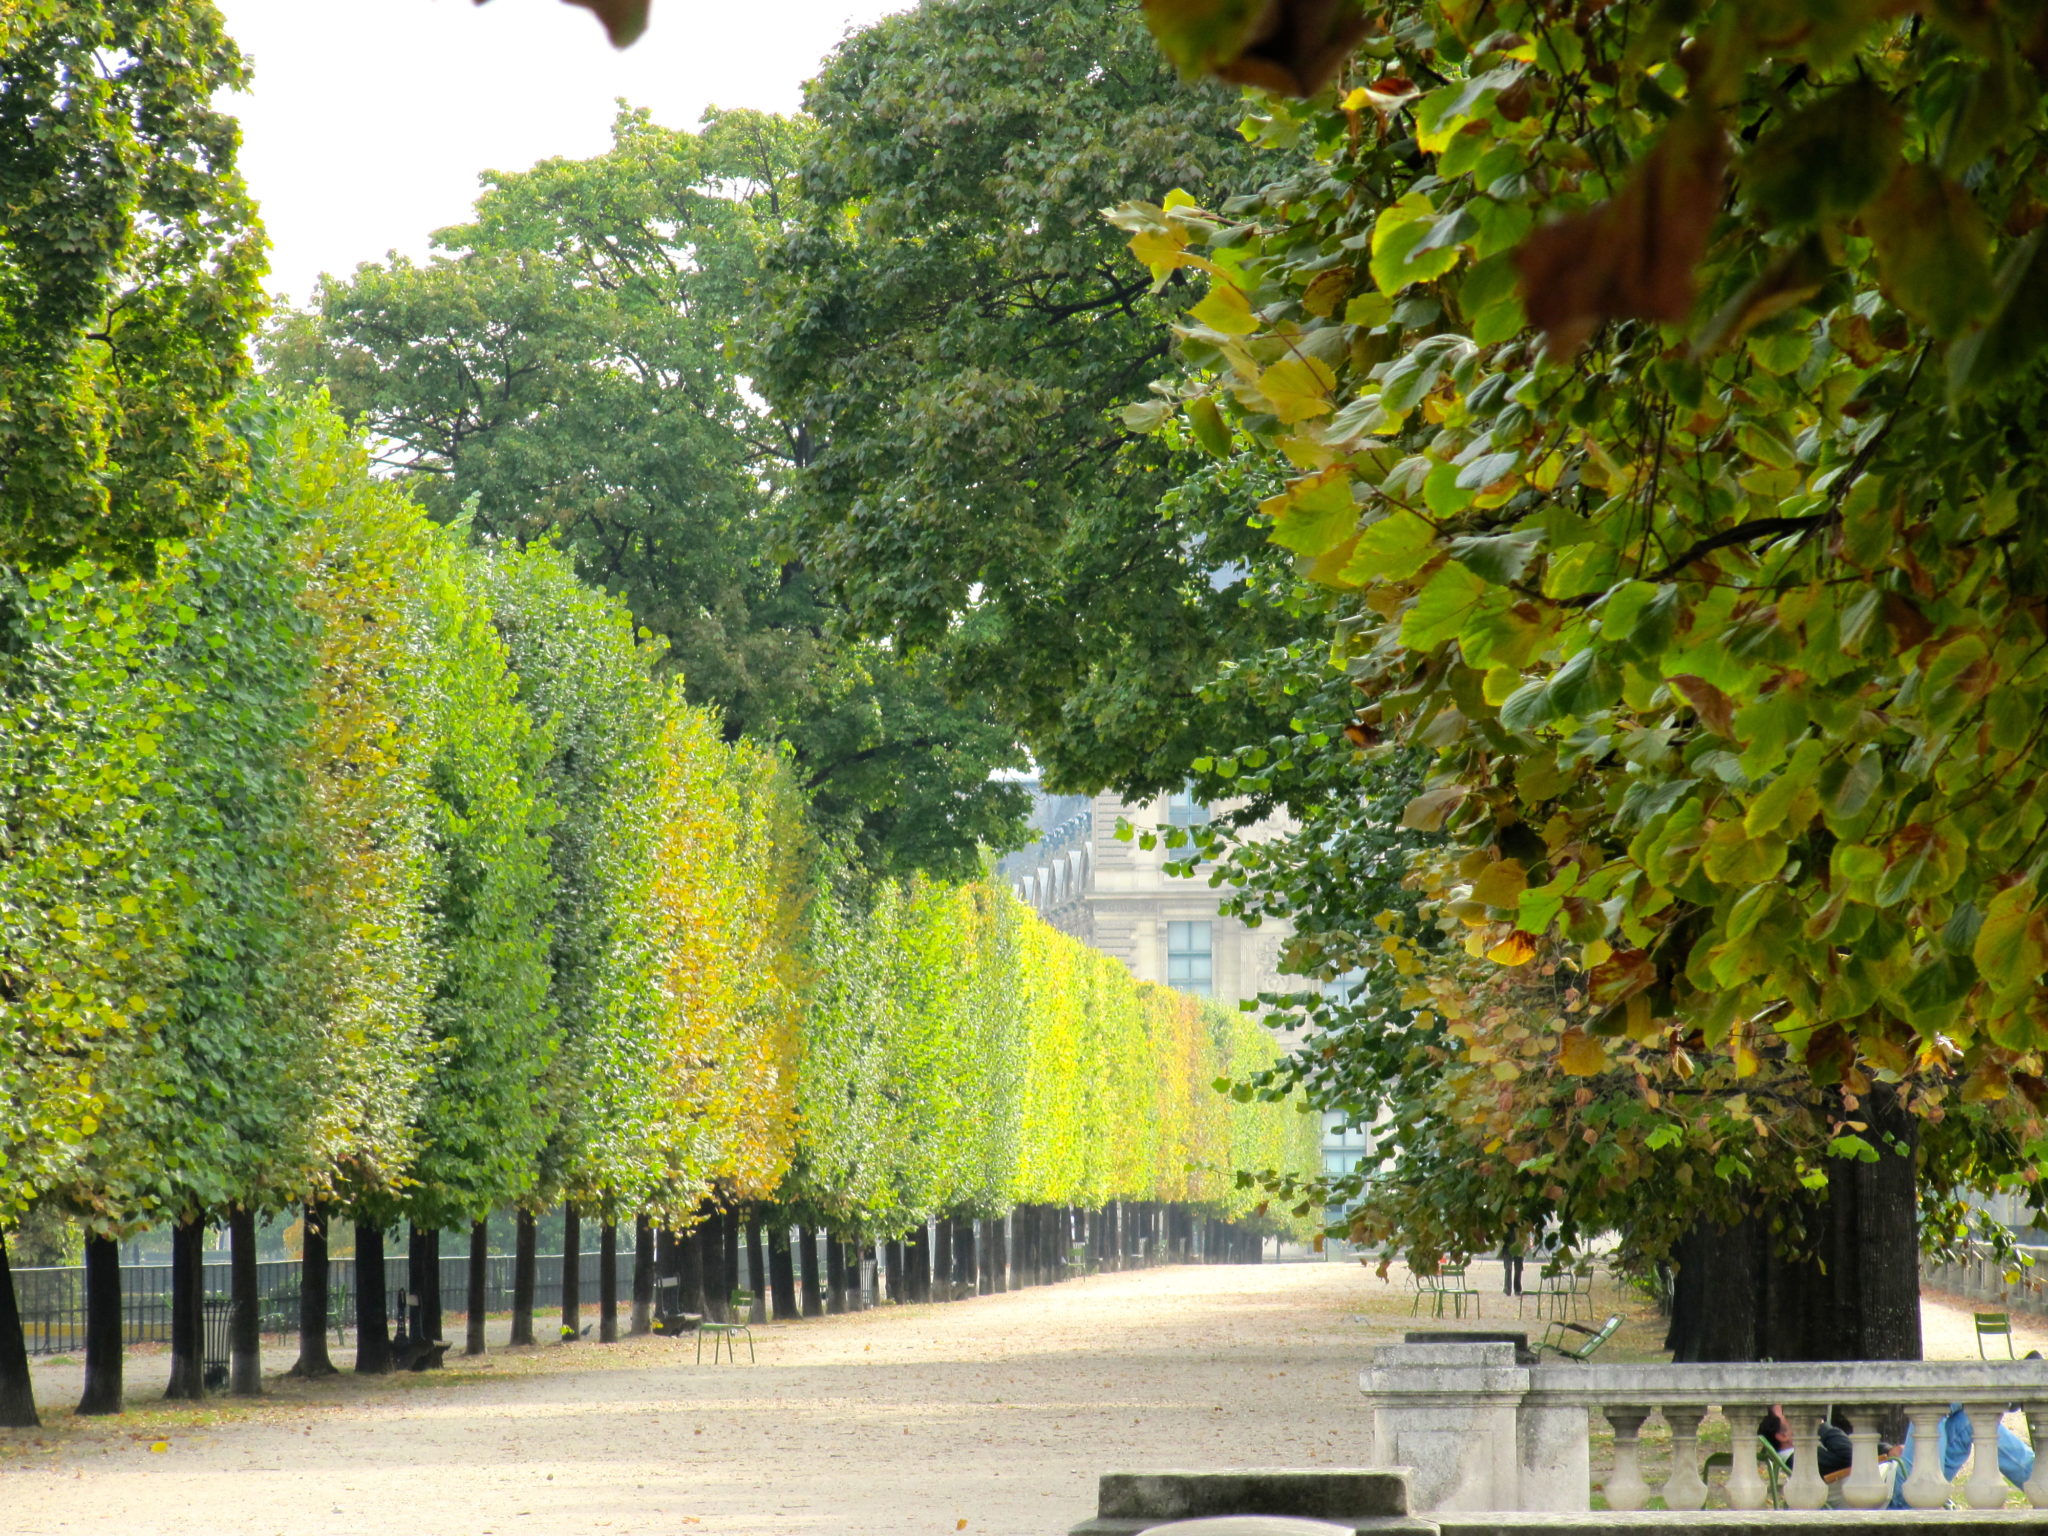 Perfectly clipped horse-chestnut trees on Champs-Élysées